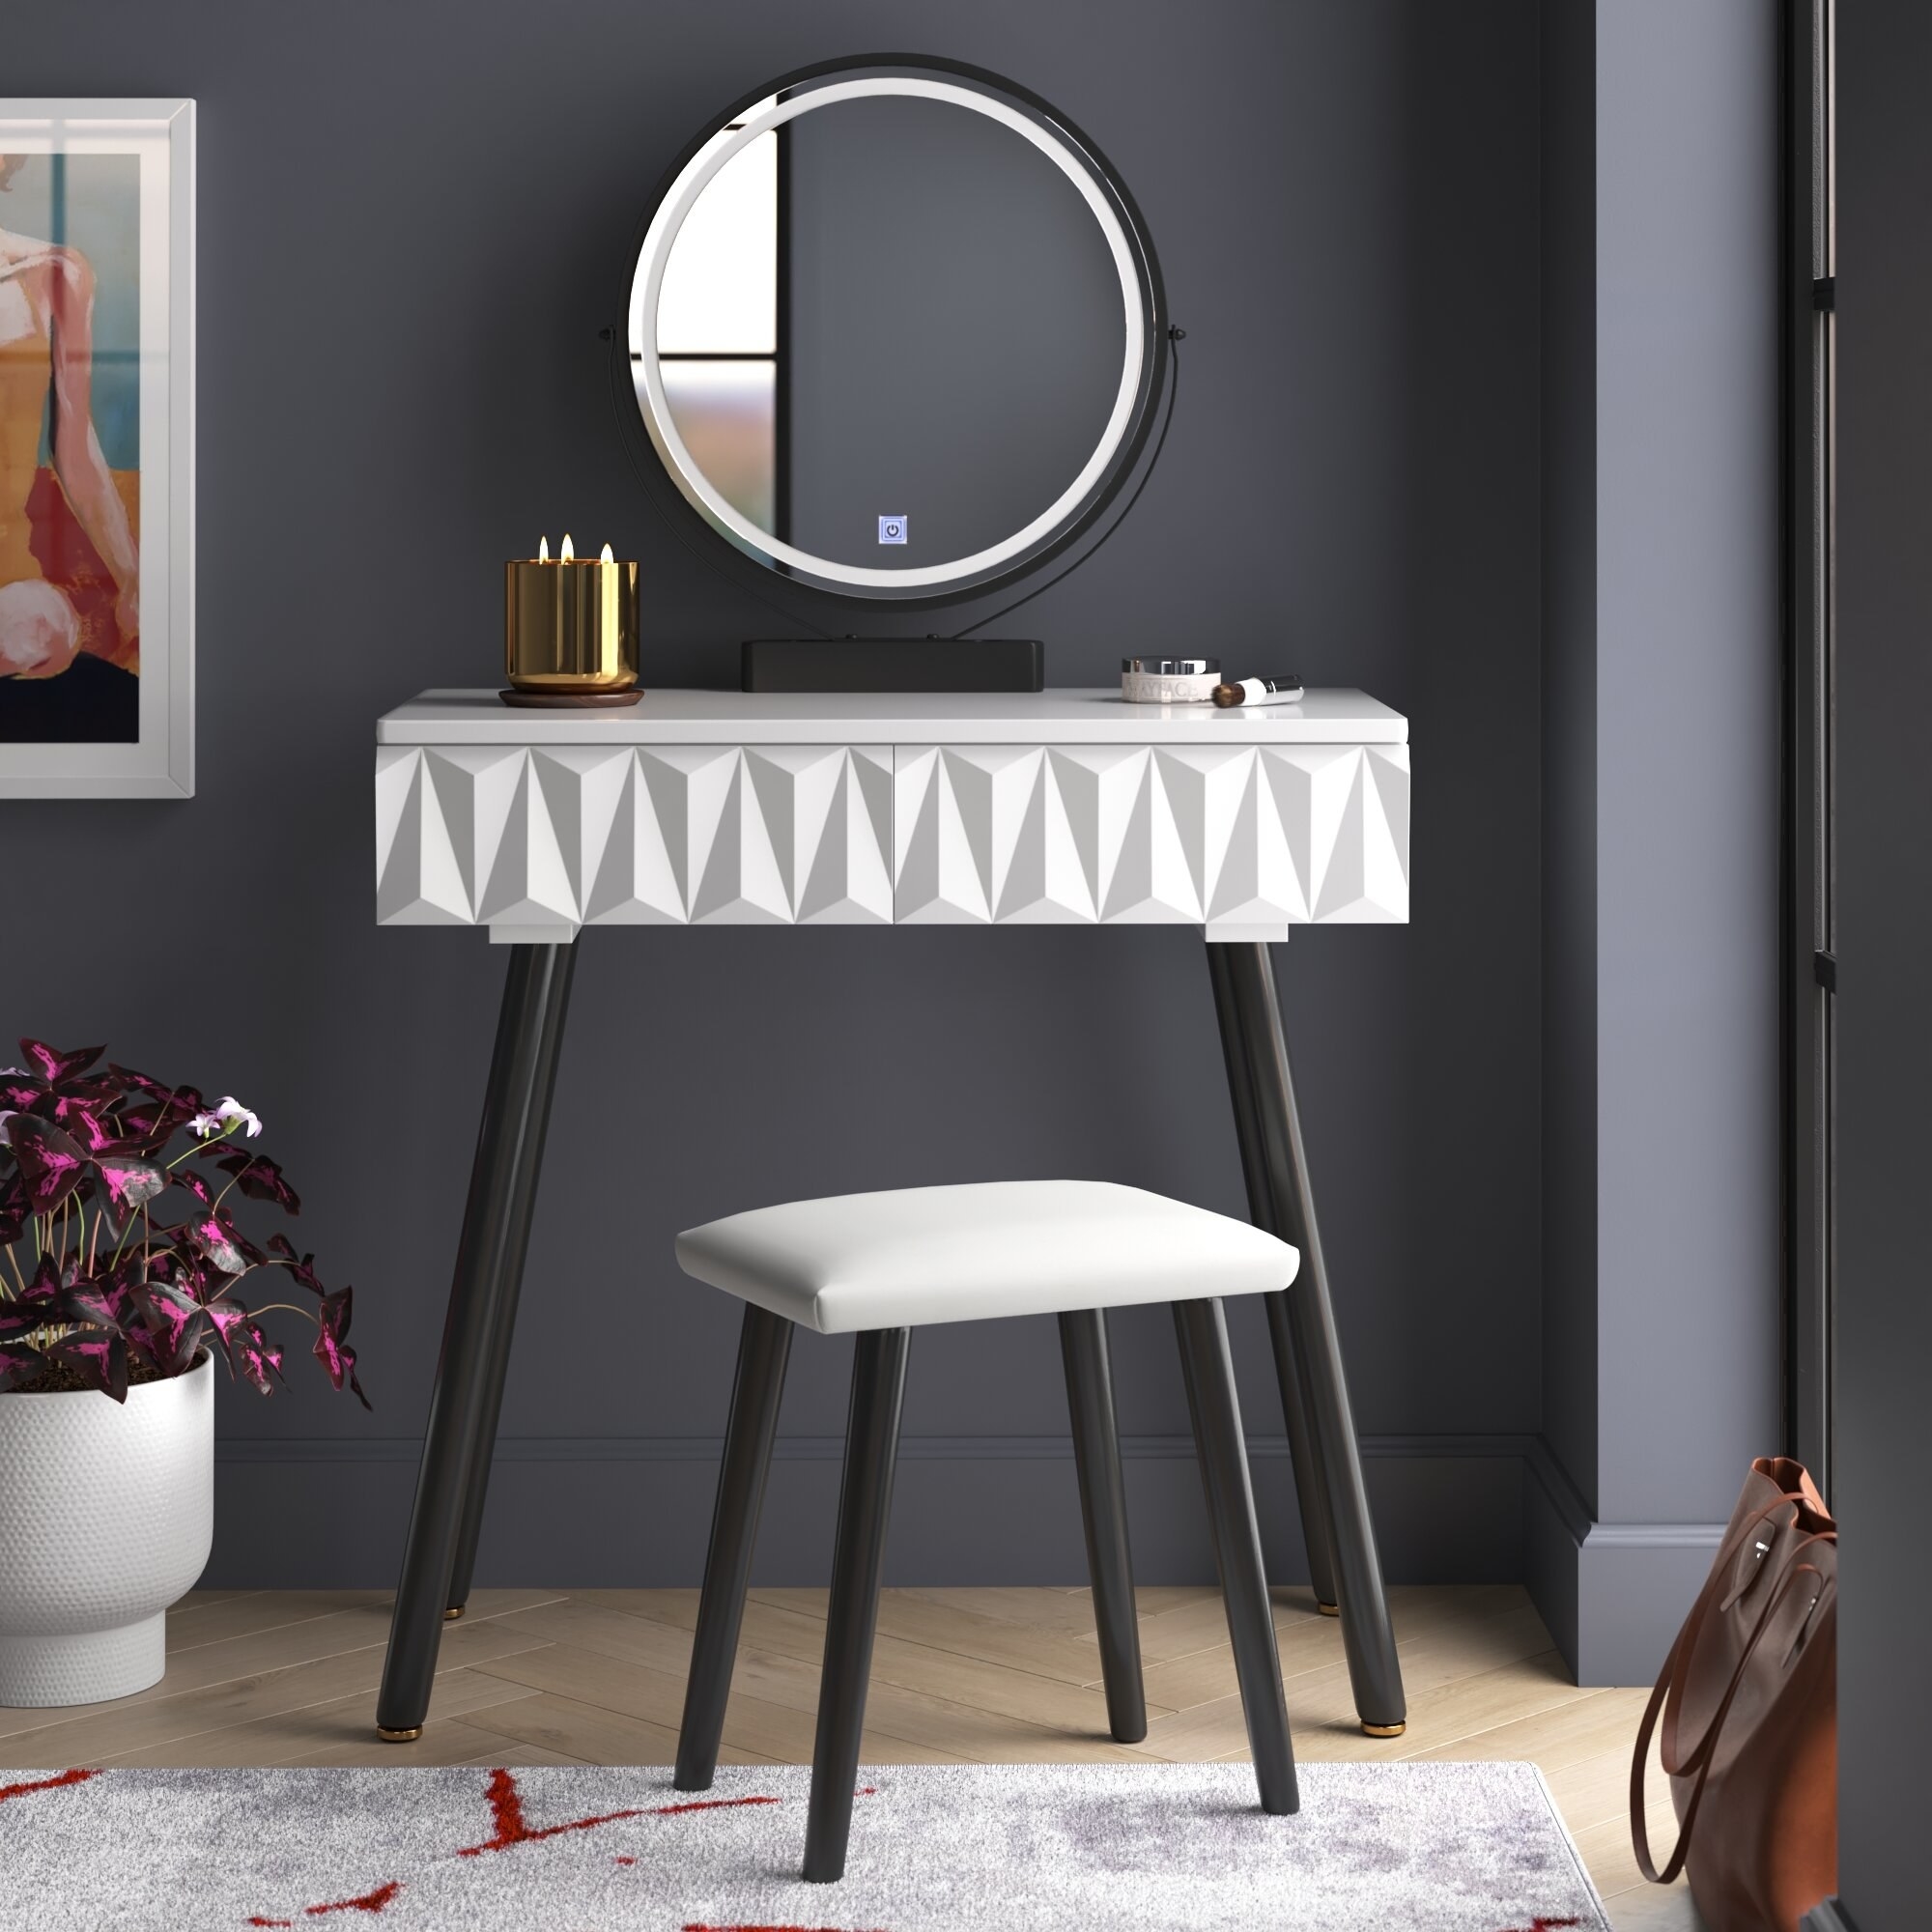 A white and grey vanity with a circular mirror